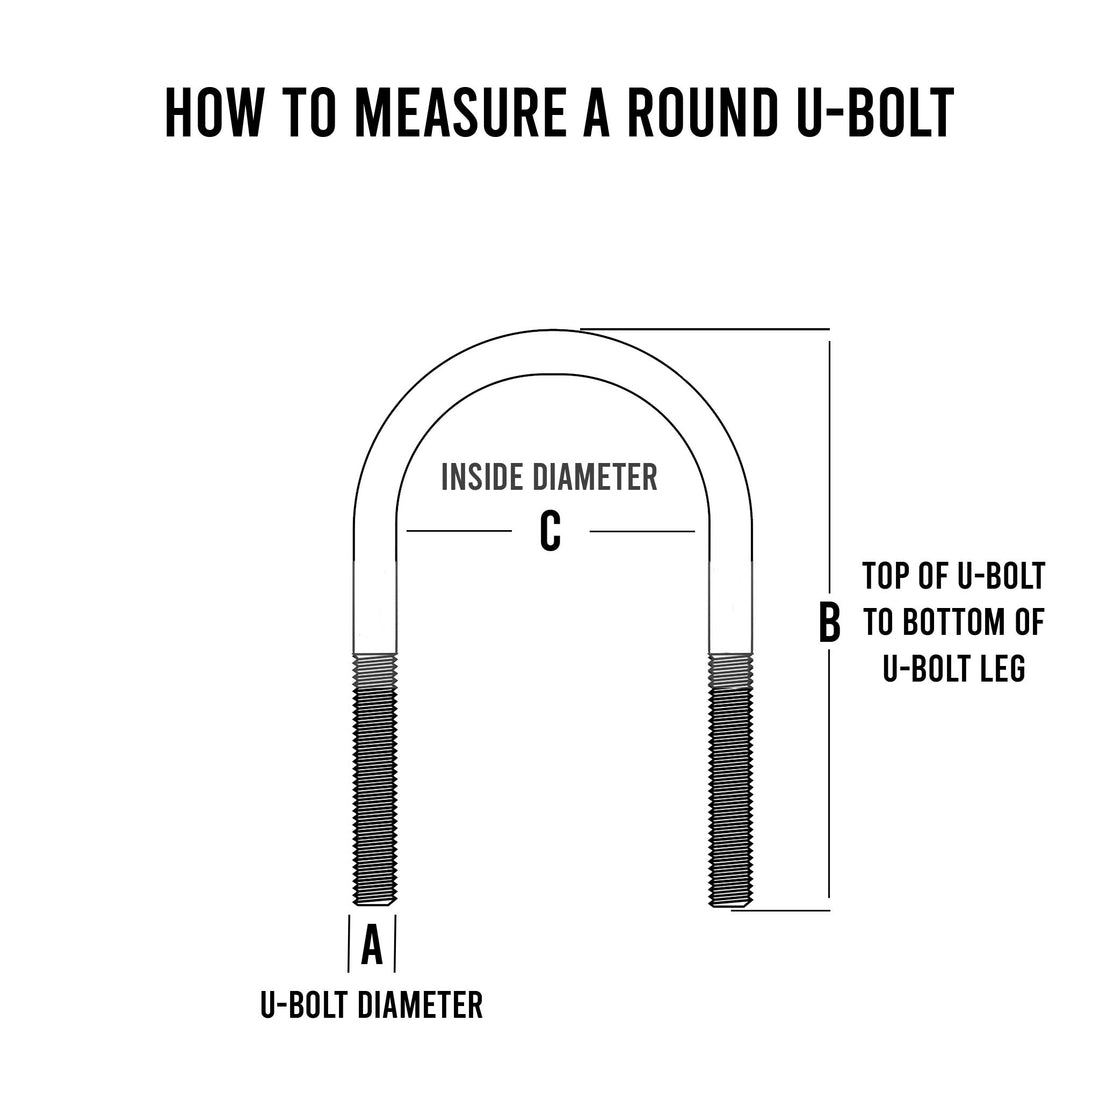 Diagram of how to measure a 9/16 inch round U-bolt.